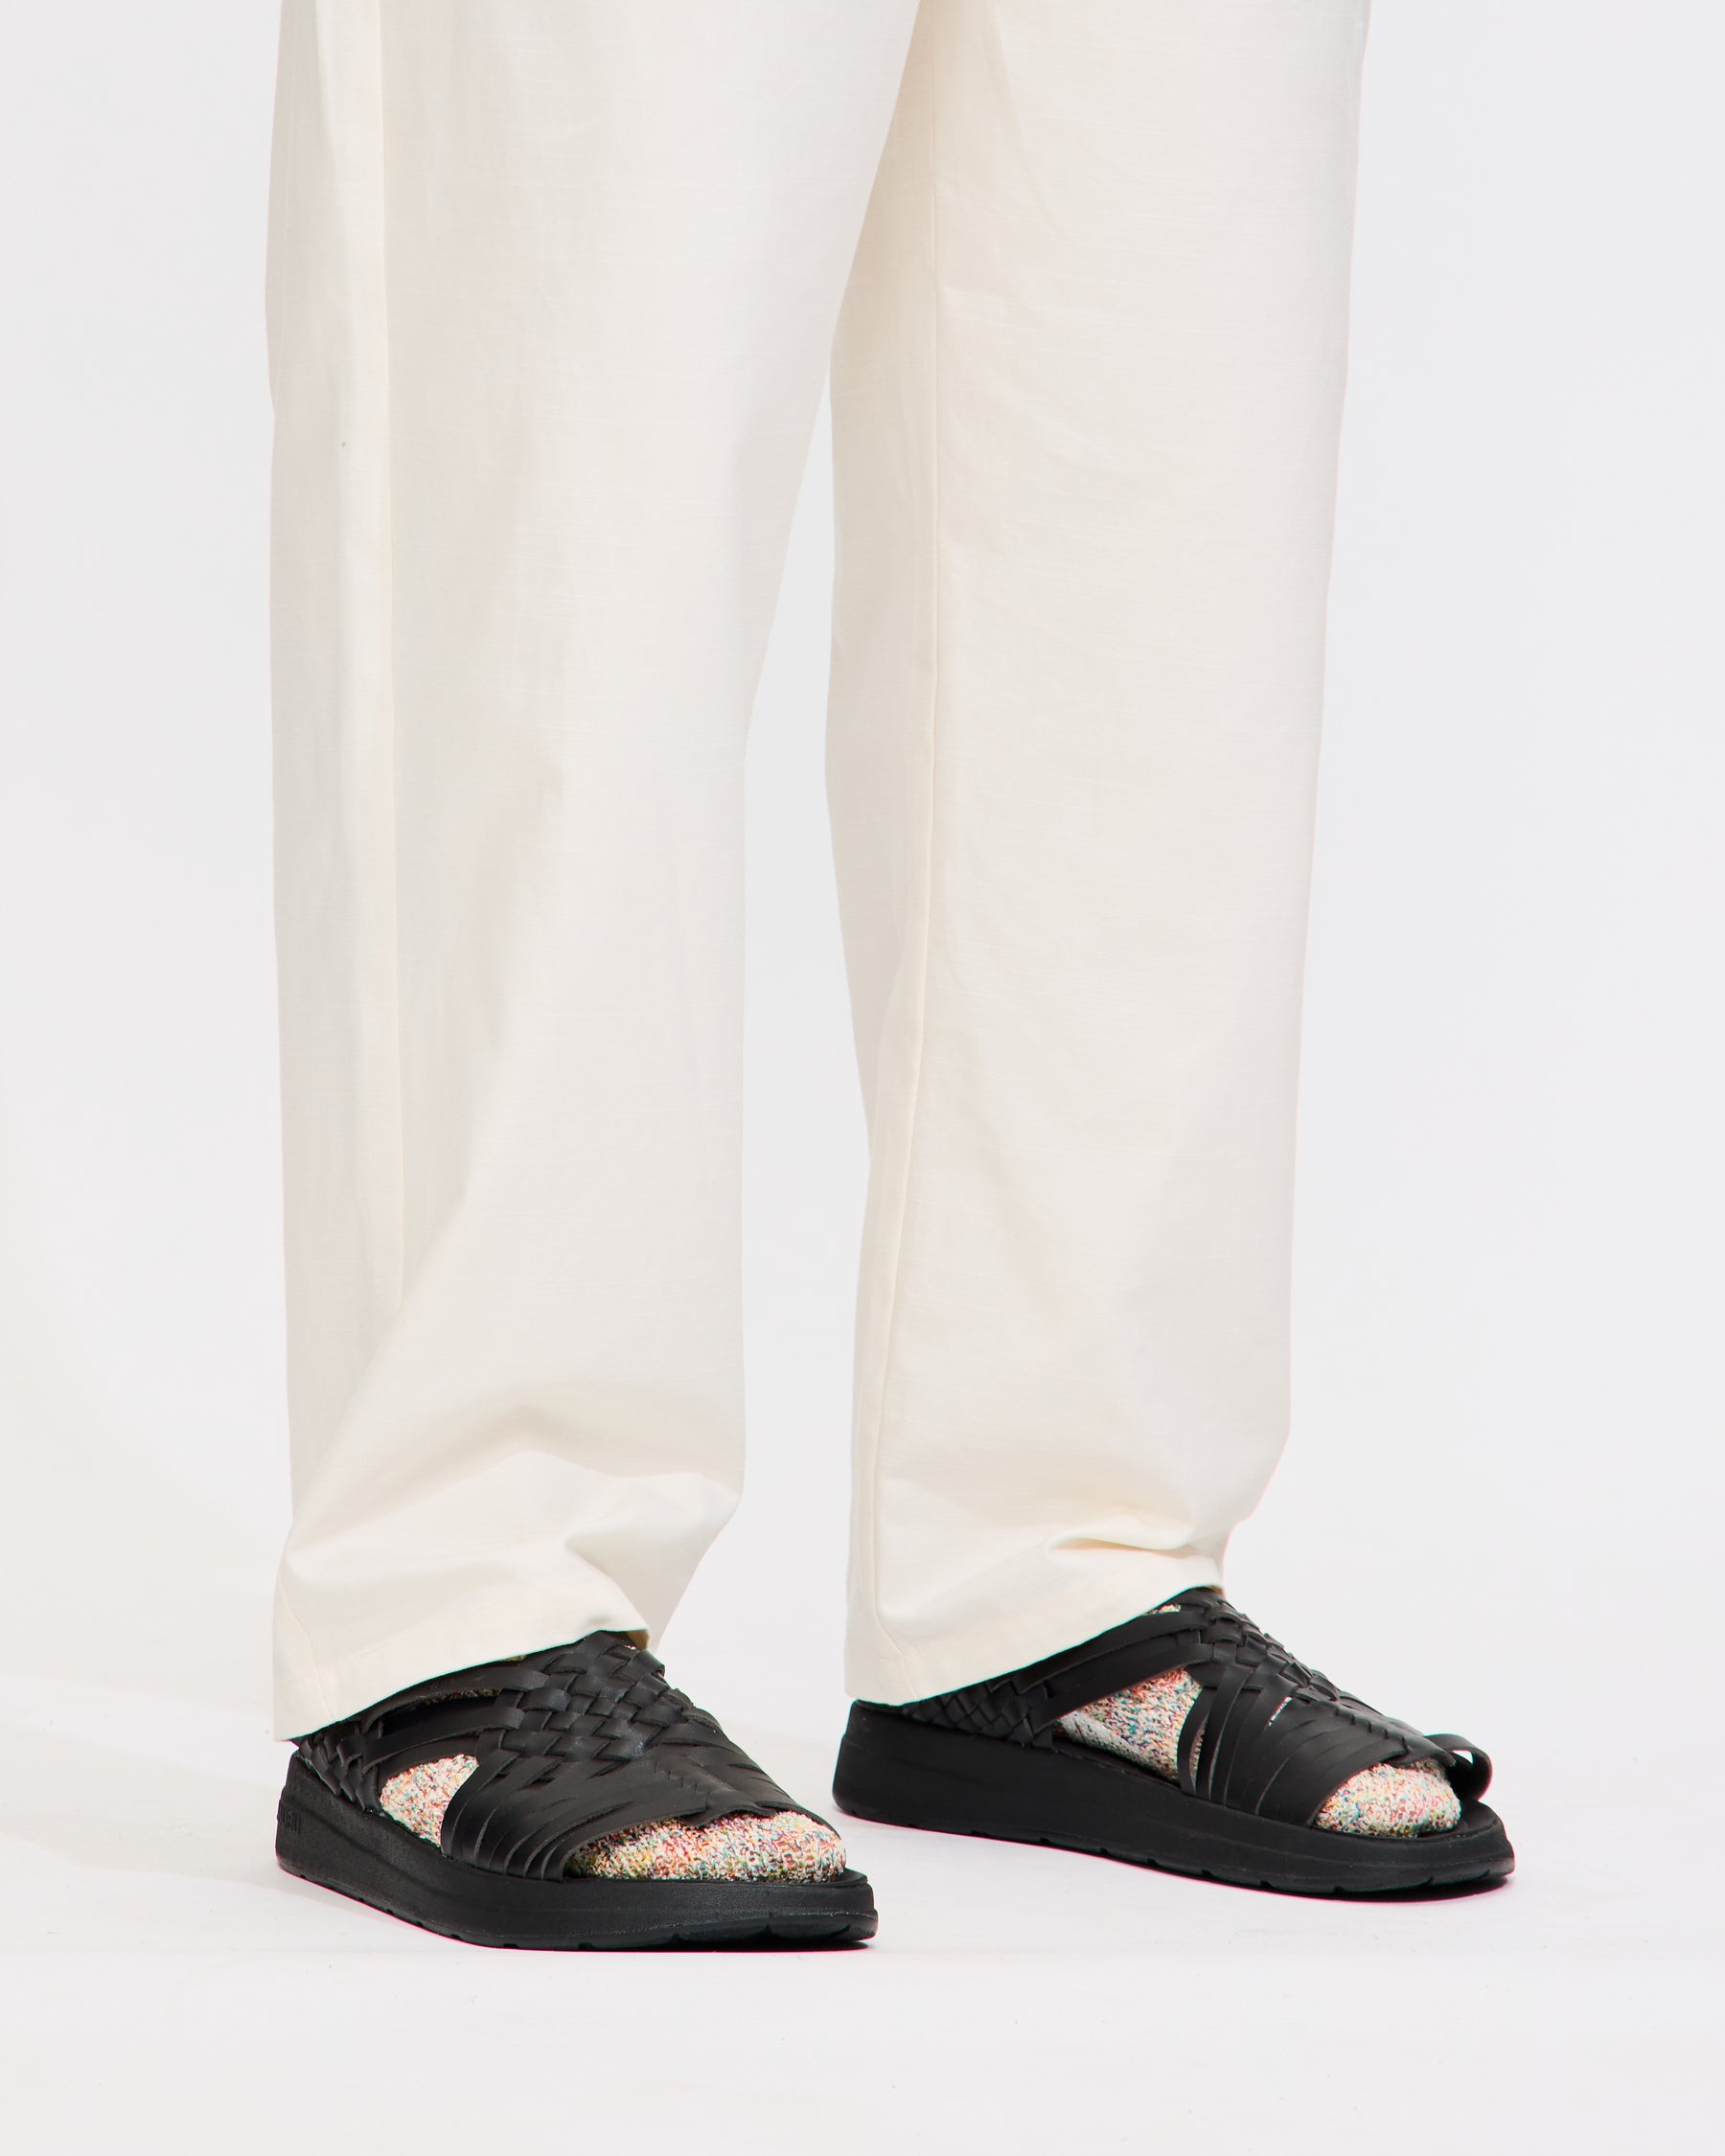 Drs Linen Pants in Off White